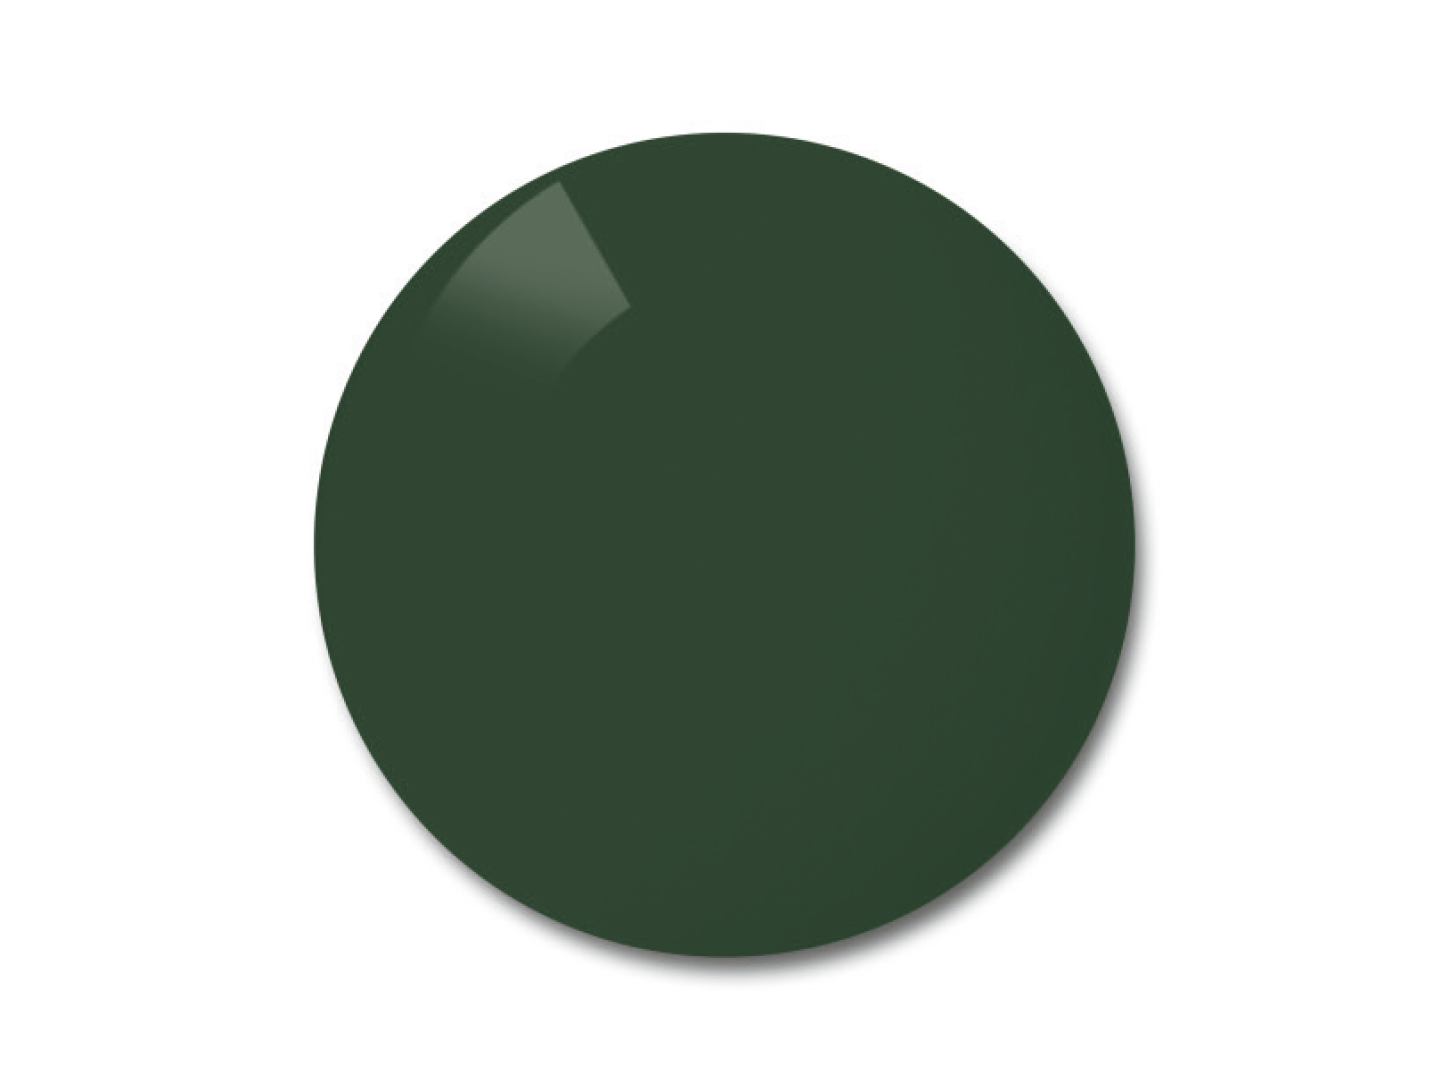 Colour example for the pioneer (grey-green) polarised lenses.